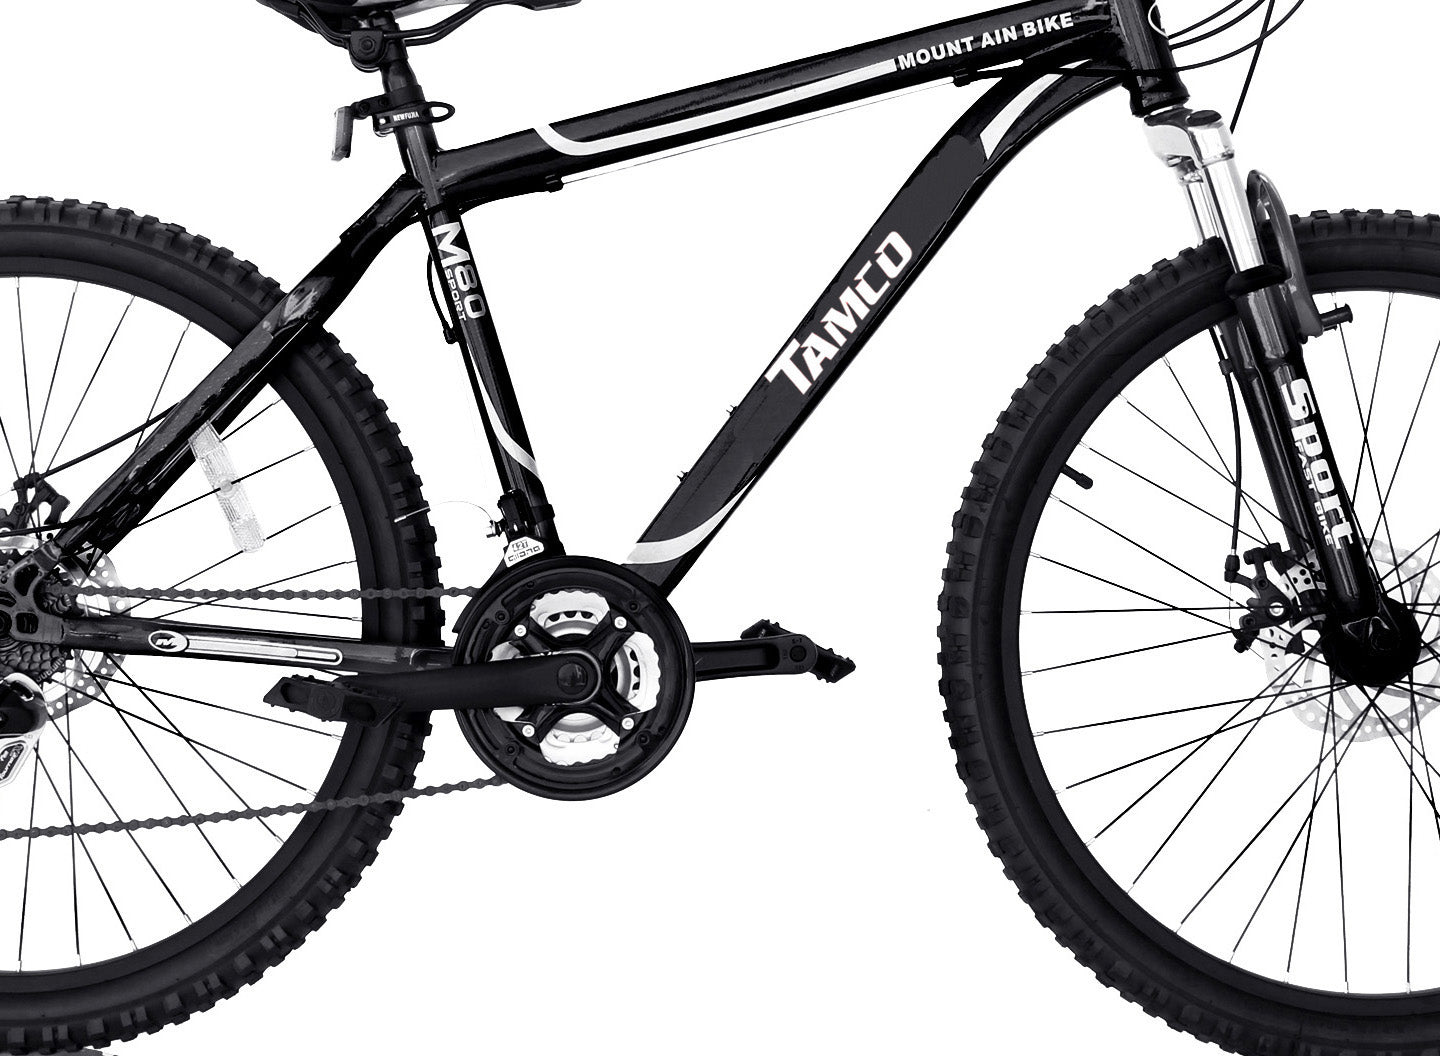 TAMCO hot sale mountain bike best mountain extreme sport 24 speed low